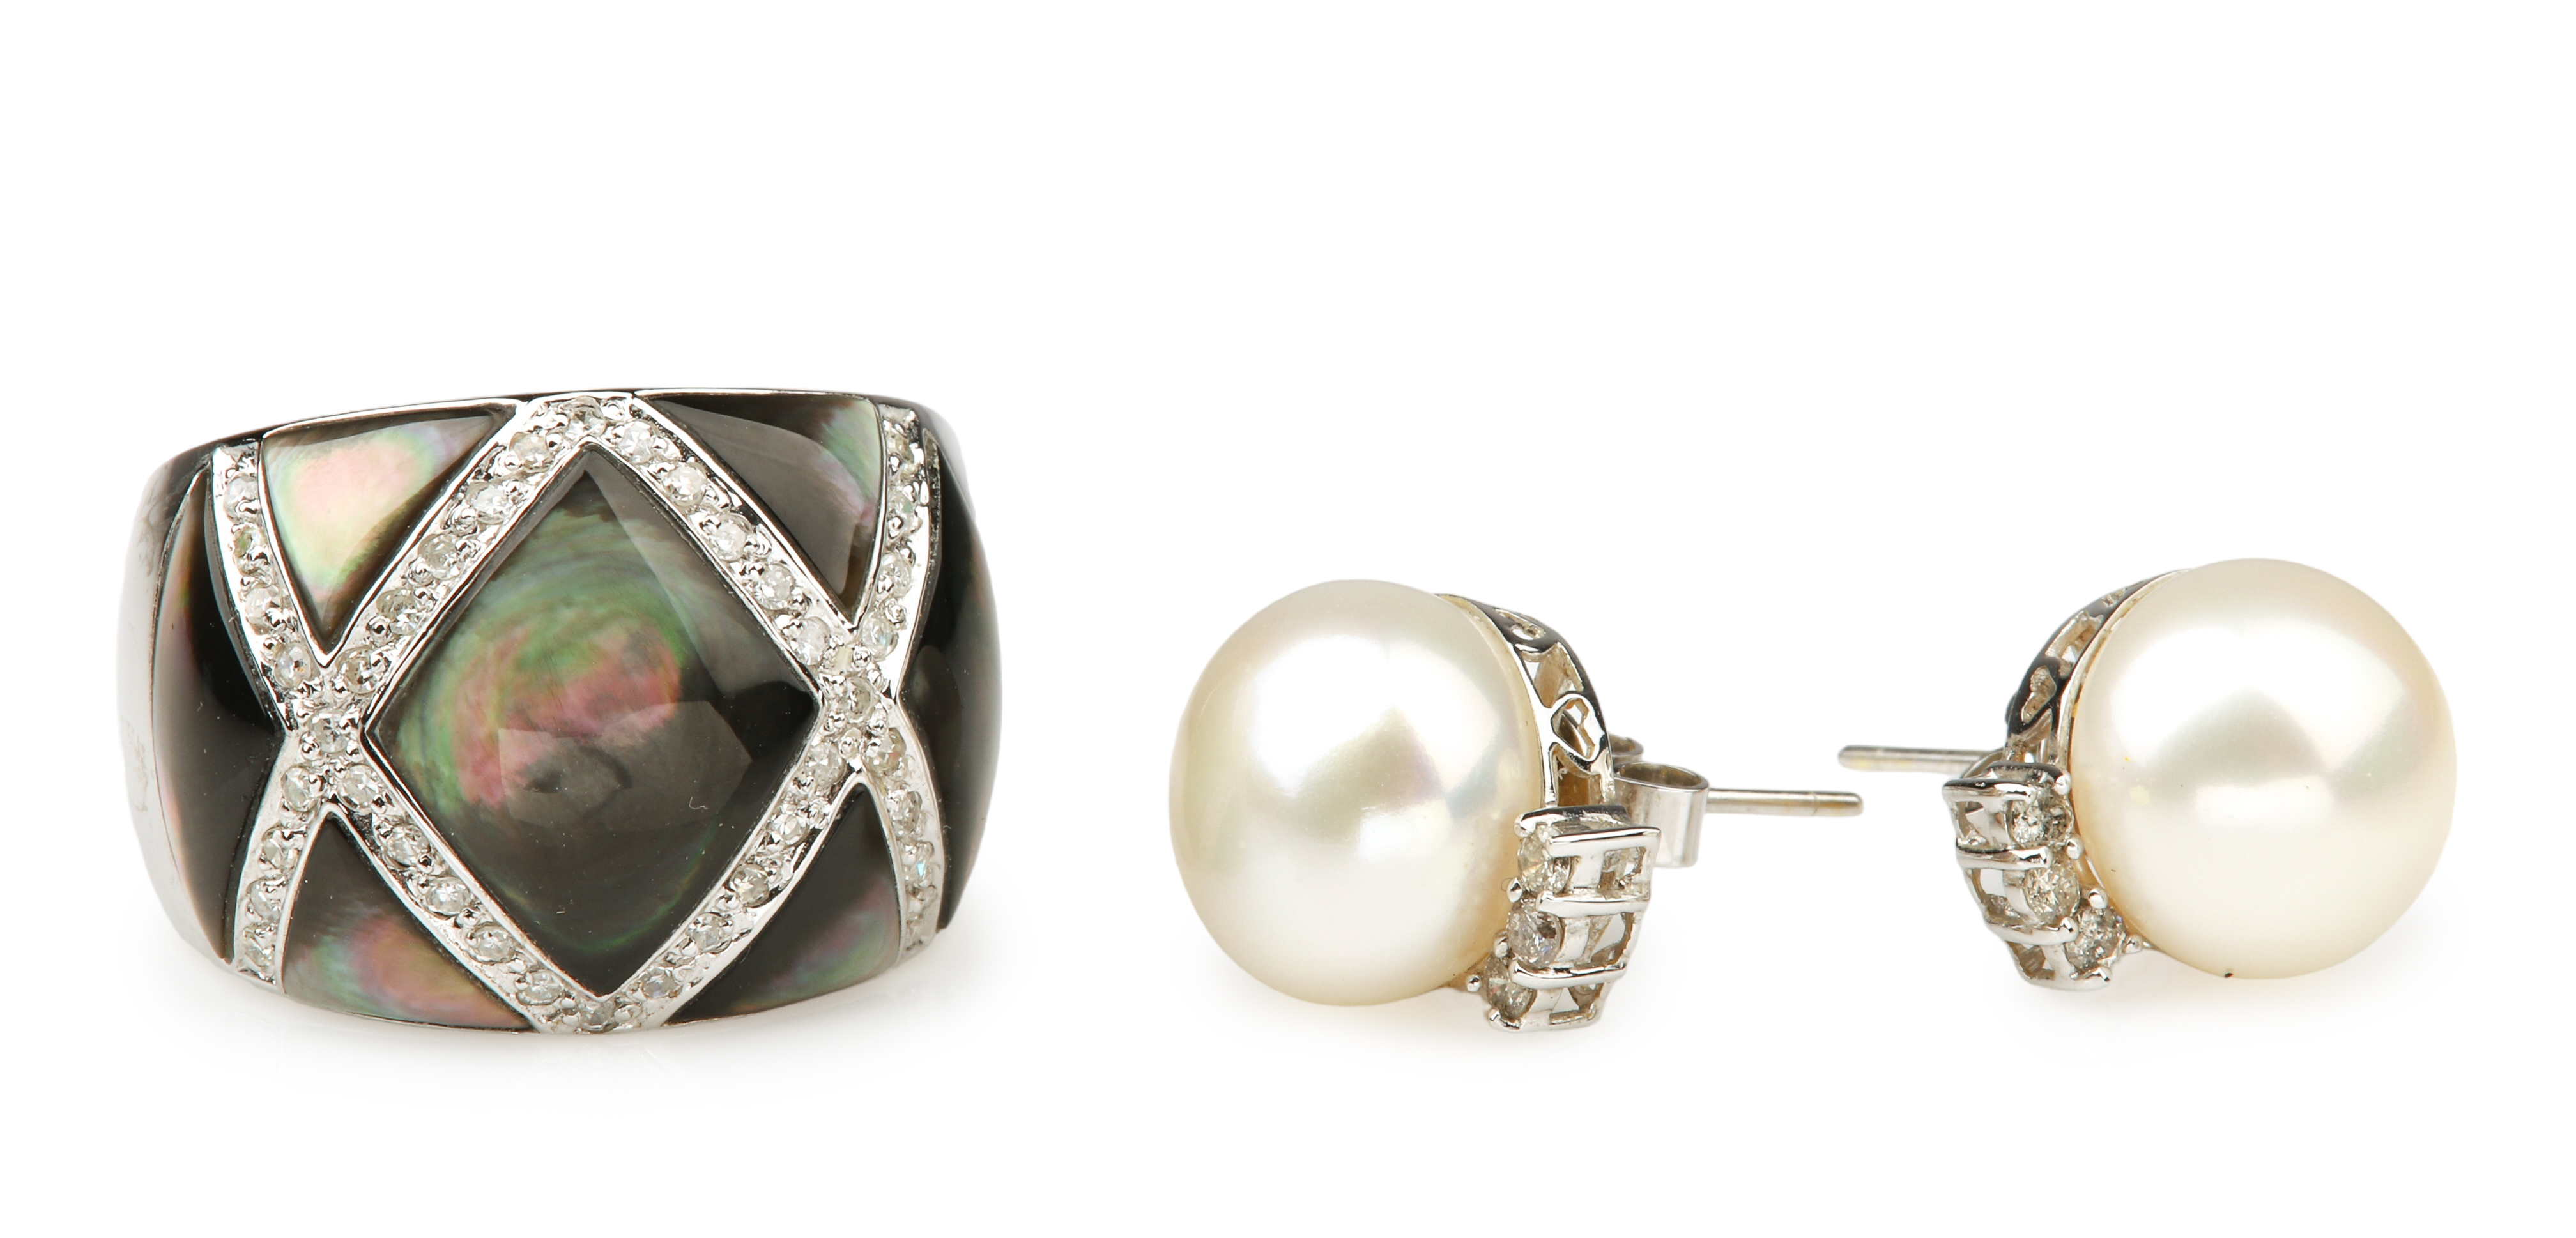 14K White gold ring and pearl earrings